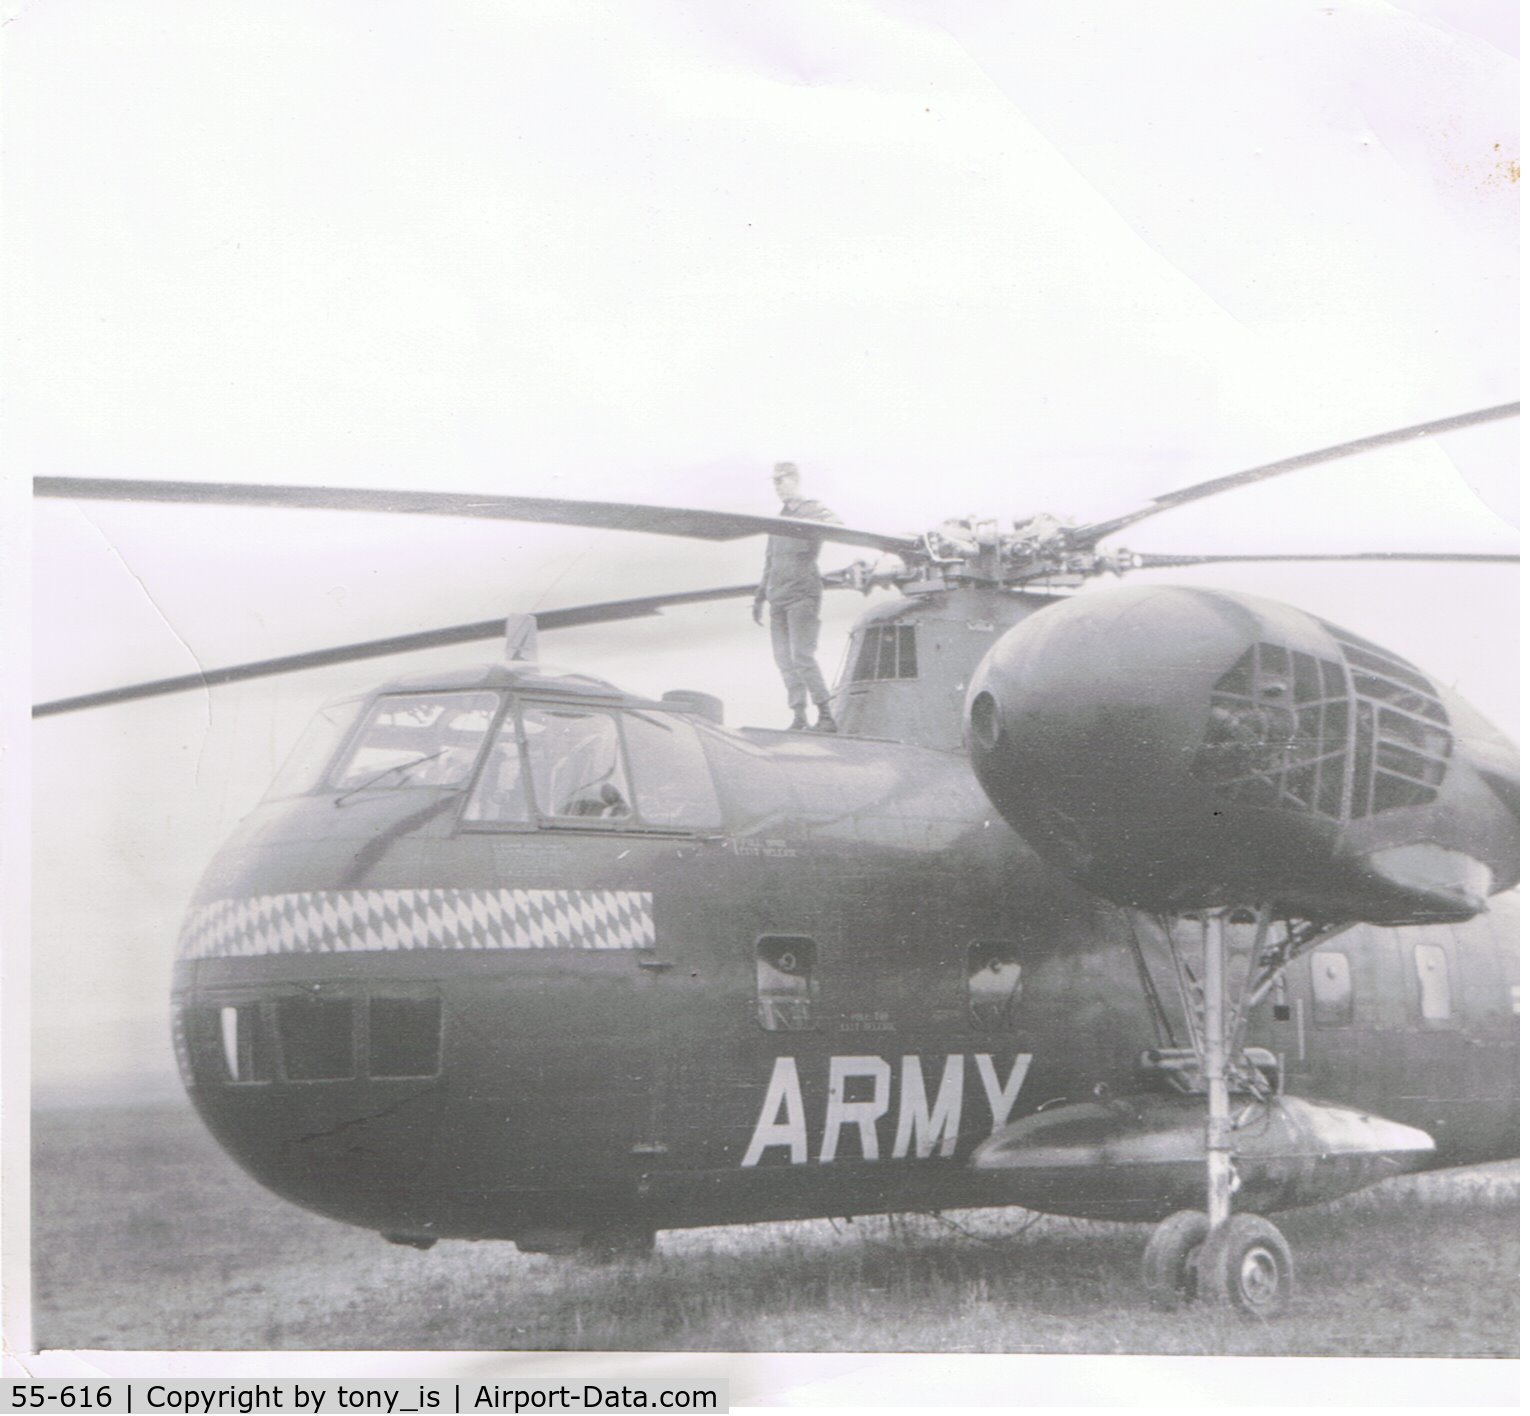 55-616, 1956 Sikorsky CH-37B Mohave C/N Not found N51892/55-616, Another of 616 taken by me the same day in Illisheim Germany, 90th Aviation Company. I ended up being the crew chief then flight engineer on 50615.